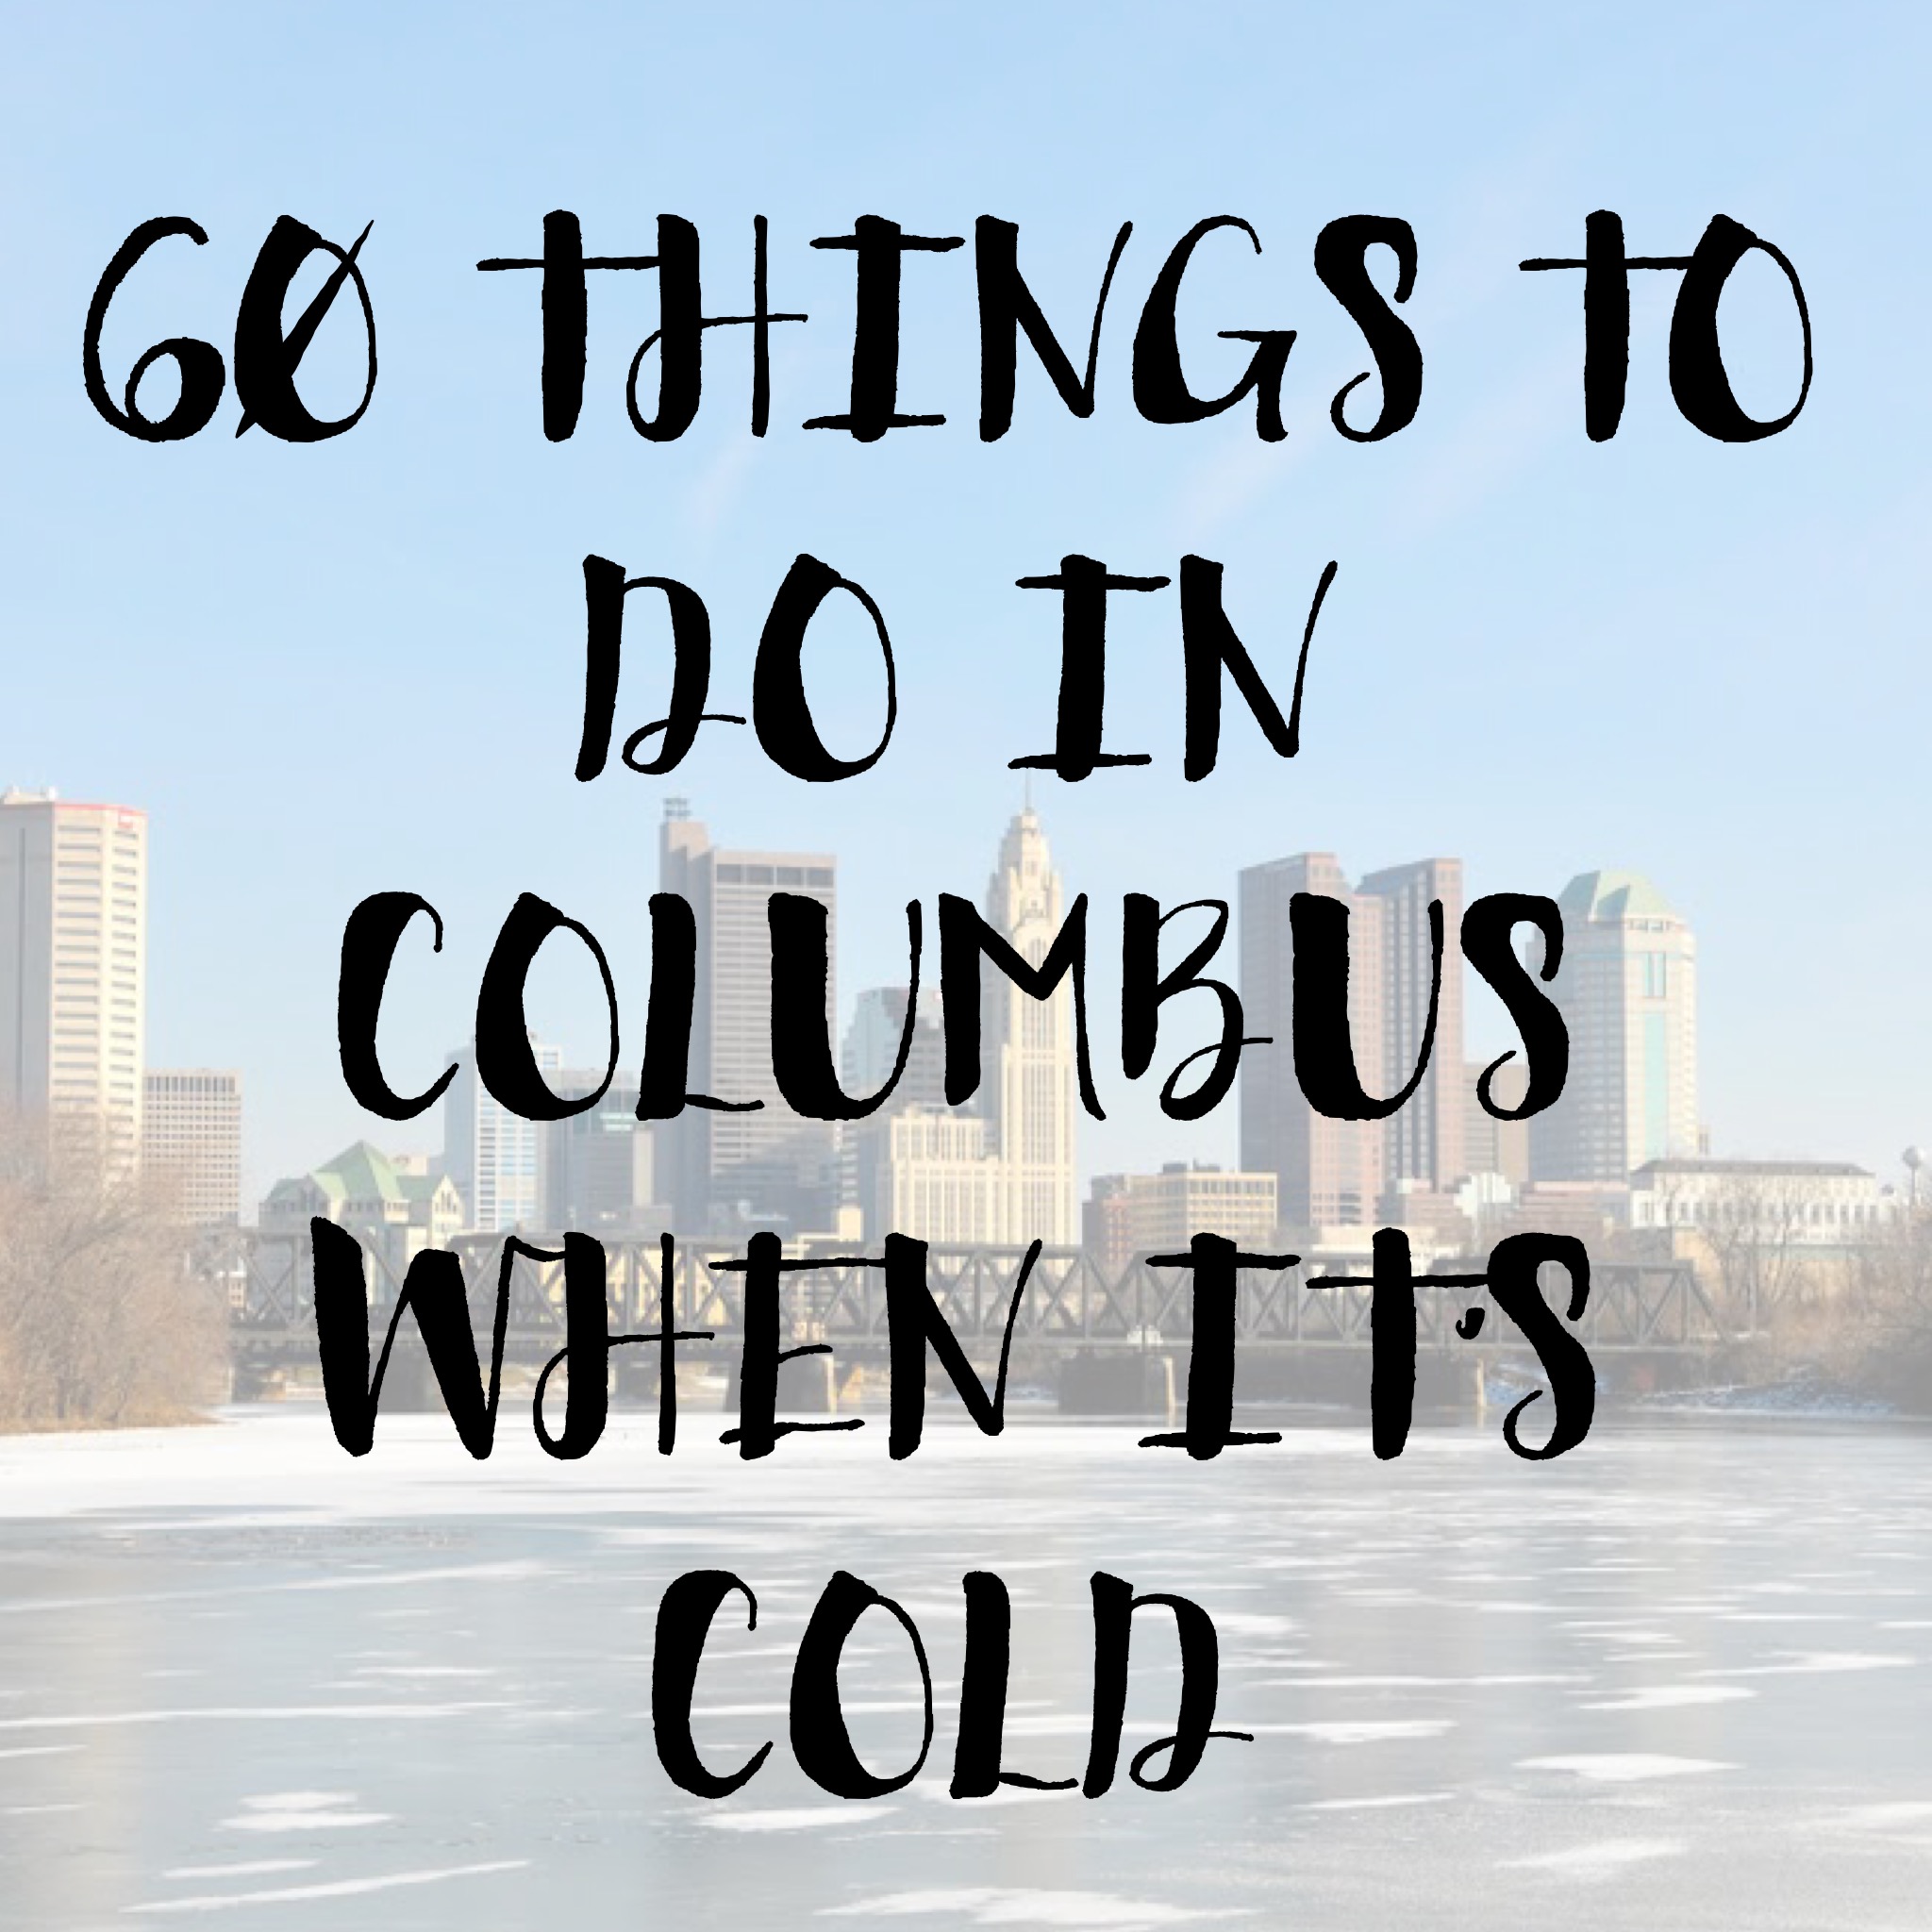 60 Things to do in Columbus when it’s Cold